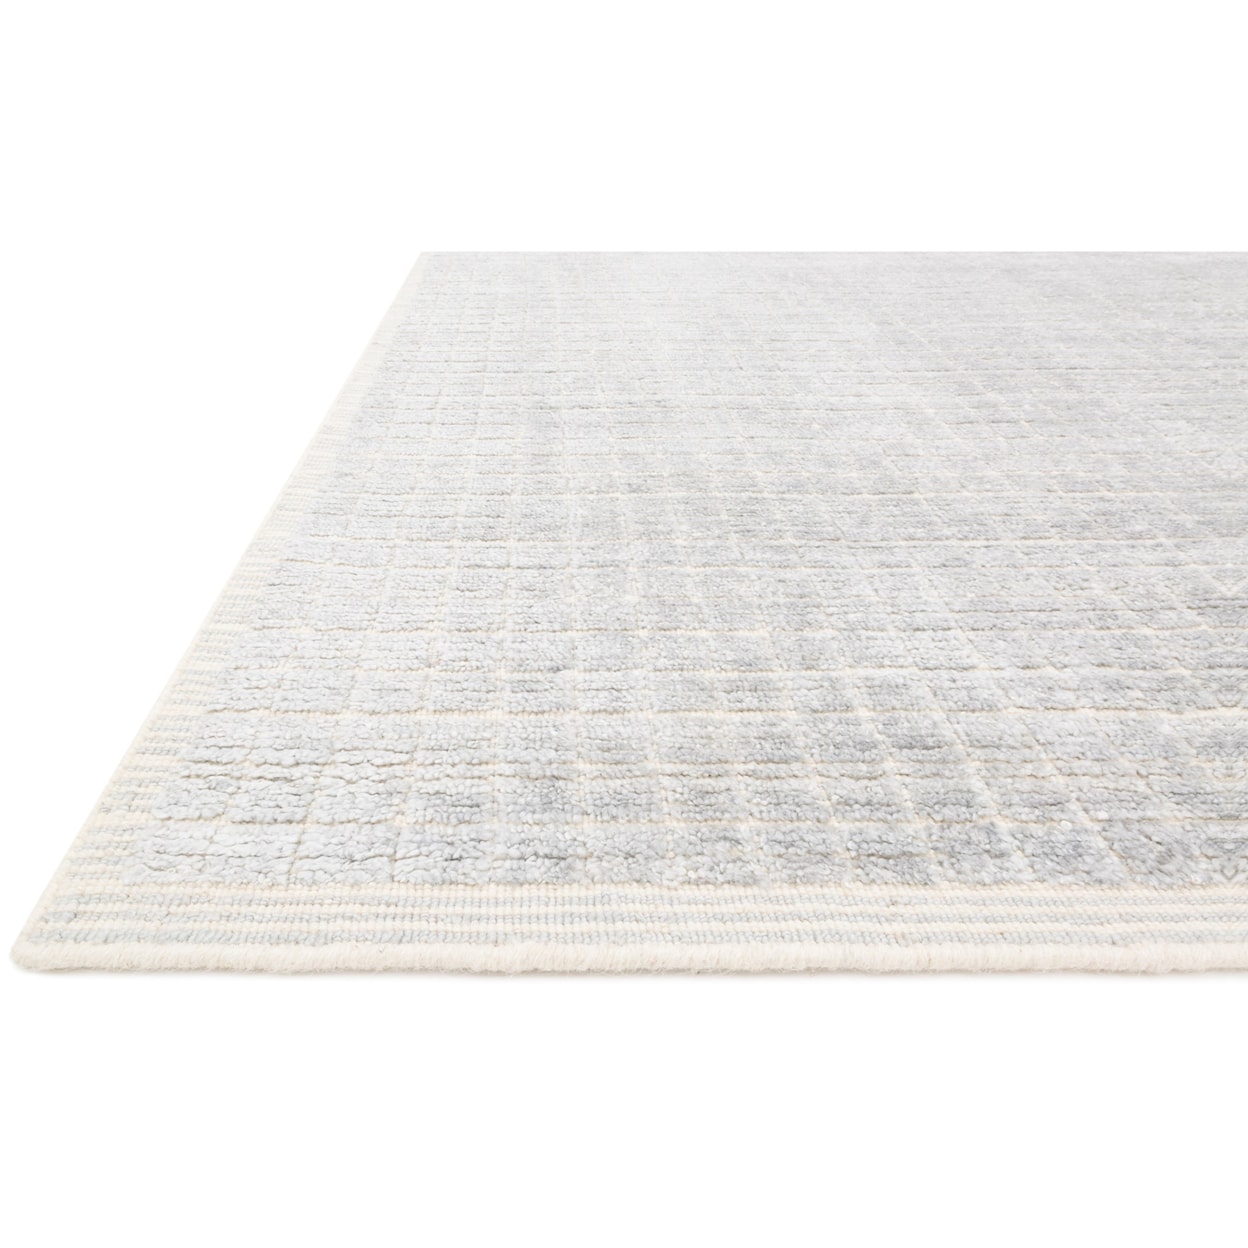 Reeds Rugs Beverly 4'0" x 6'0" Silver / Sky Rug